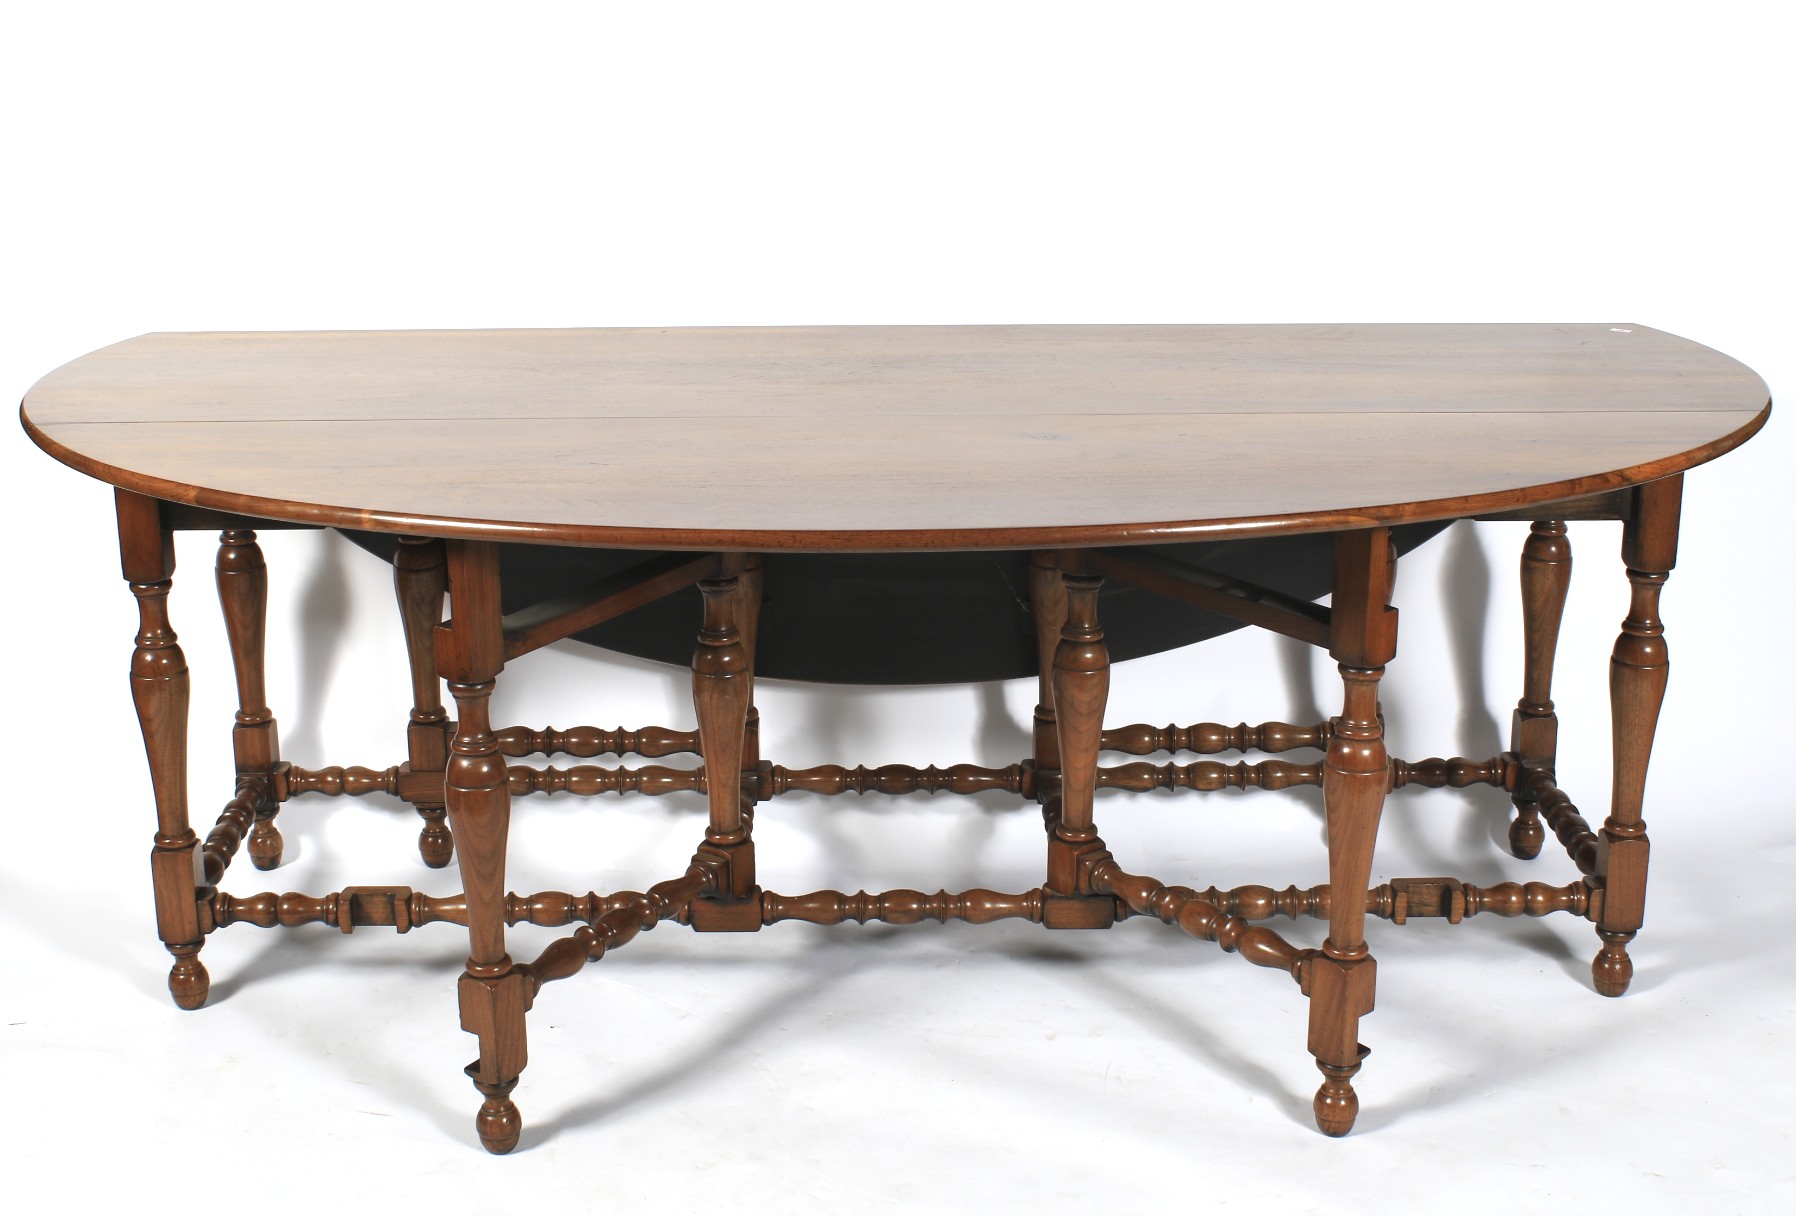 A 20th century elm wake drop leaf table and chairs. - Image 2 of 5